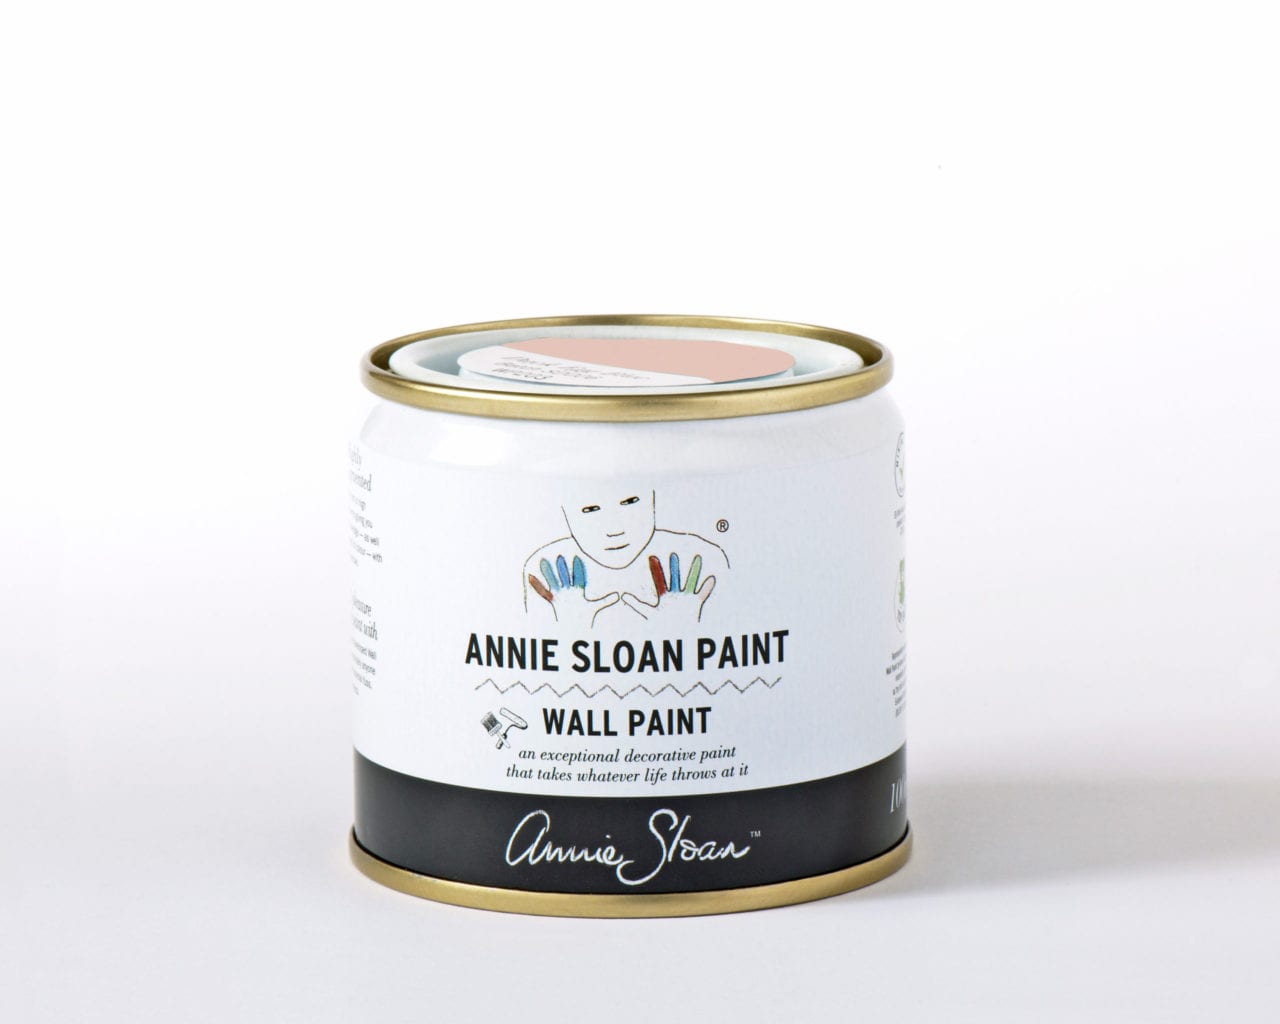 100ml tester tin of Wall Paint by Annie Sloan in Antoinette, a soft pale pink